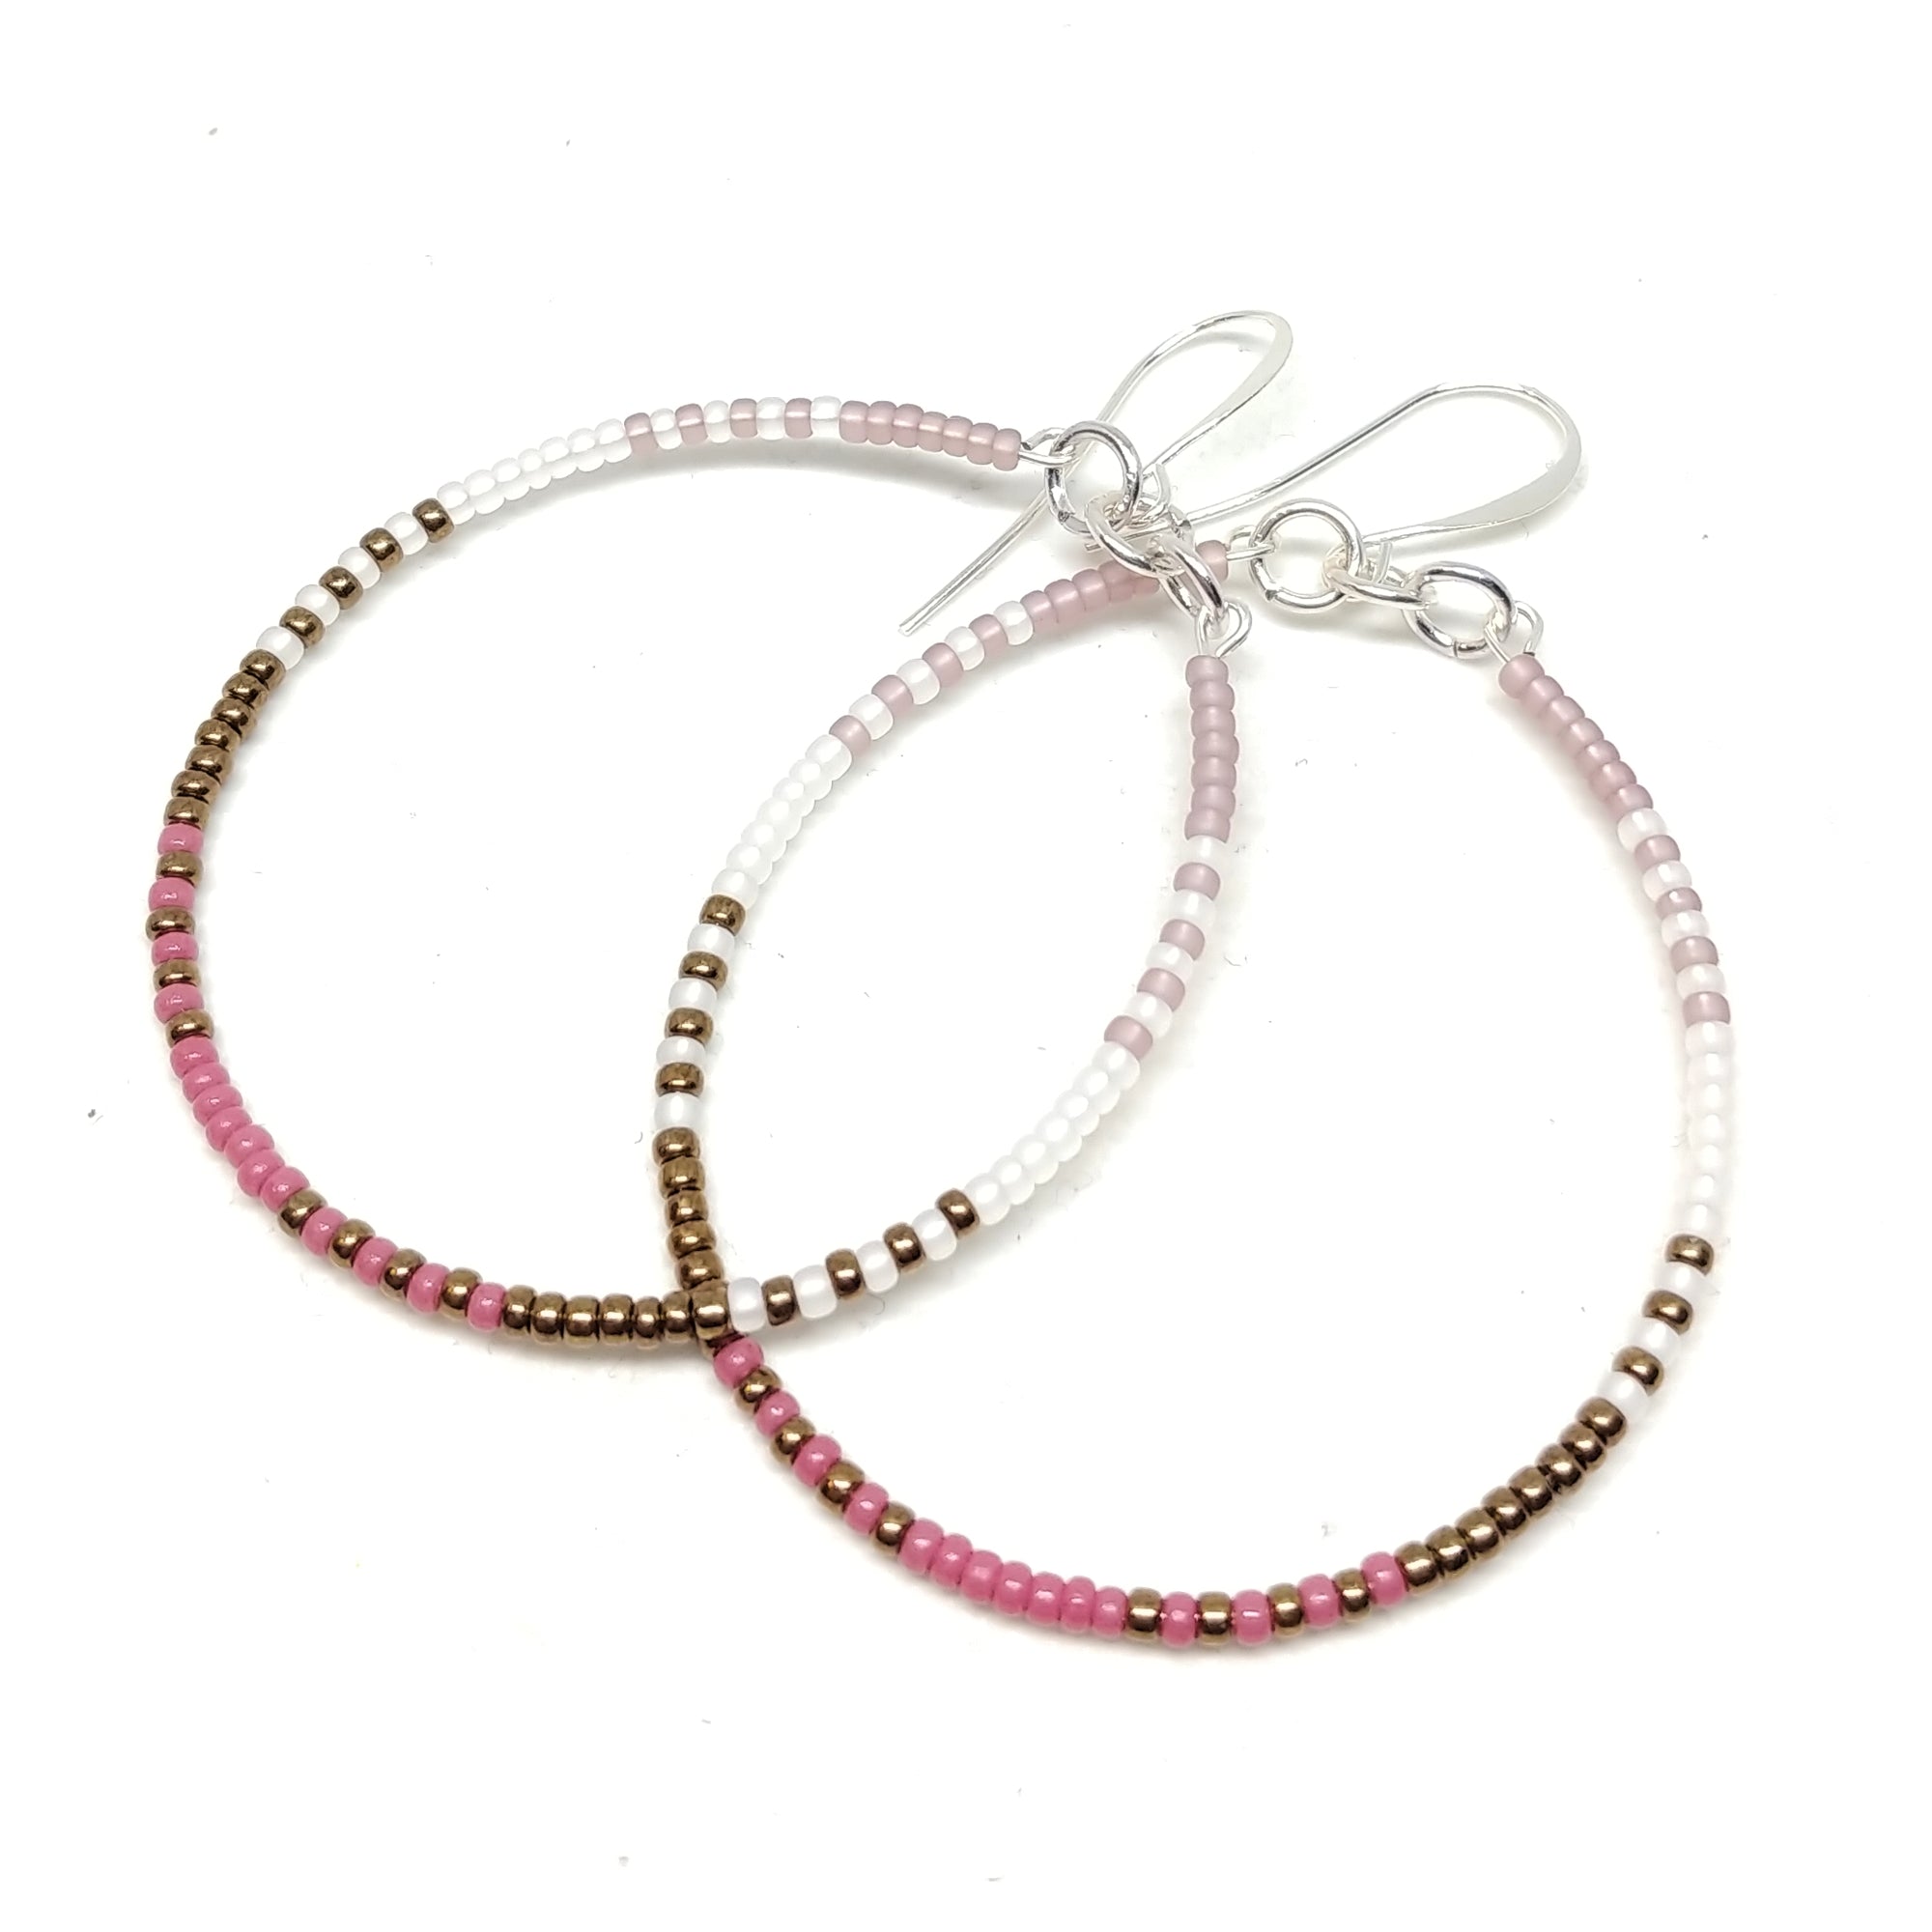 Beauty Hoops: Silver-plated beaded hoops featuring seed beads in amethyst, white, bronze and mulberry.